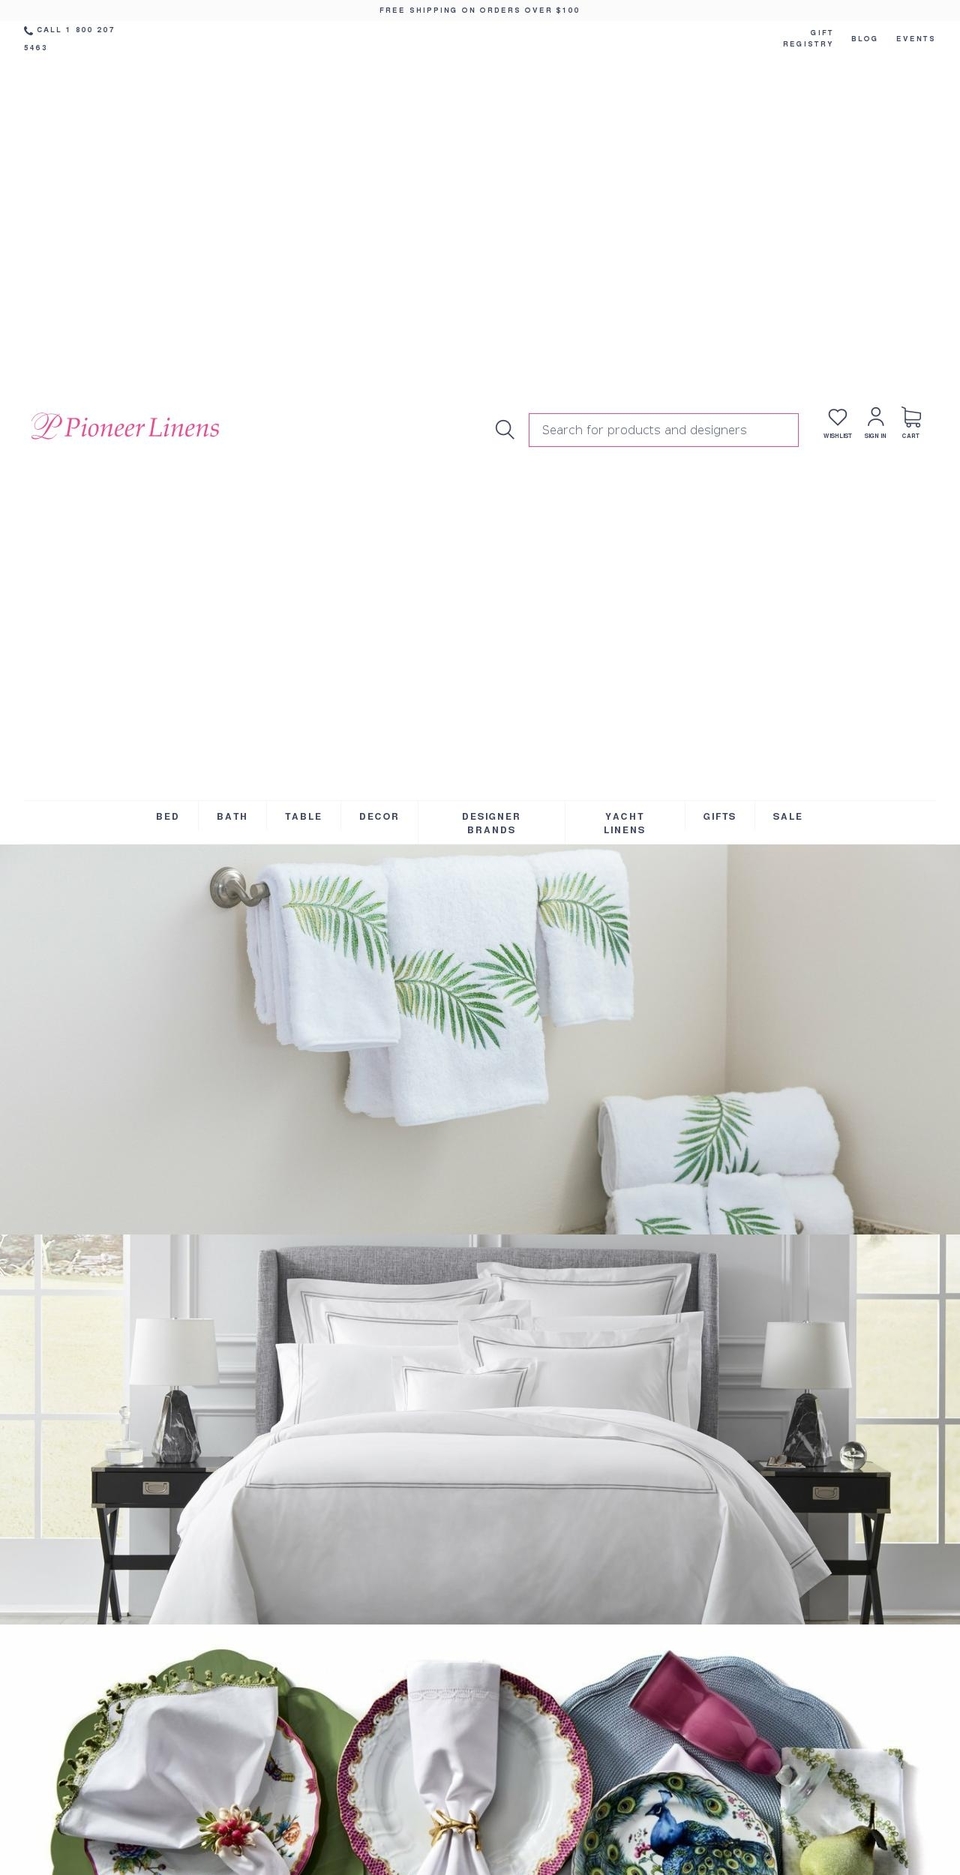 Buko Shopify Theme - Products Consolidation Shopify theme site example matoukbedlinens.com